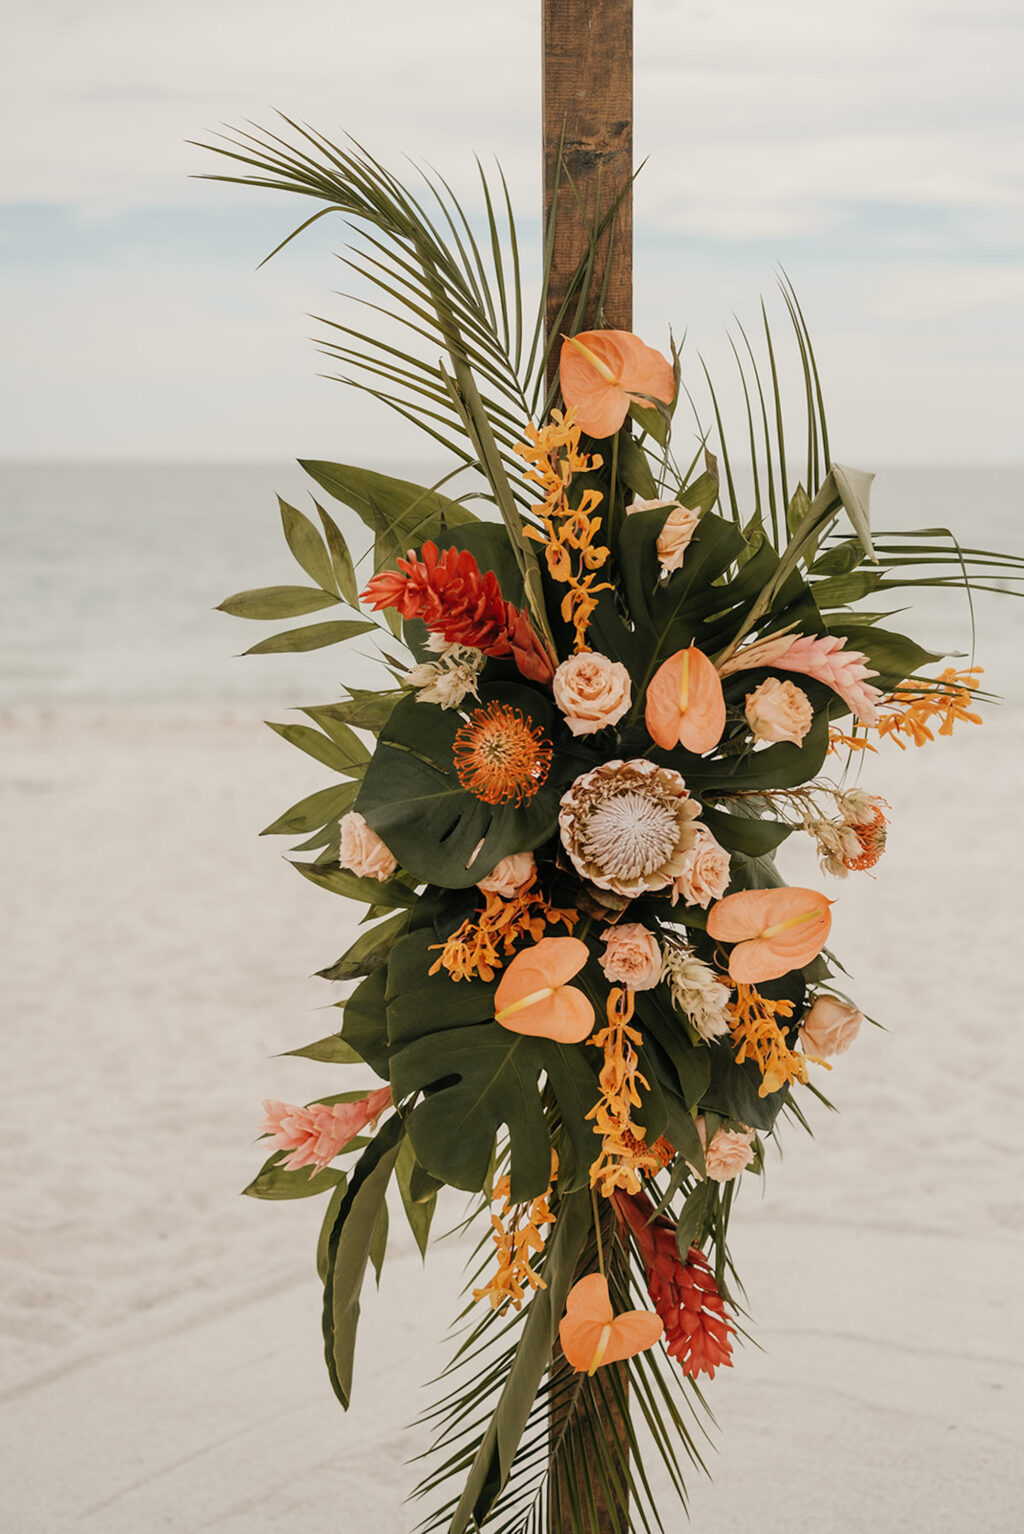 Square Wedding Arch with Tropical Monstera, Orange Anthurium, Palm Leaf, Pink Torch Ginger, King Protea Beach Altar Arrangement Ideas | Tampa Bay Florist Save the Date Florida